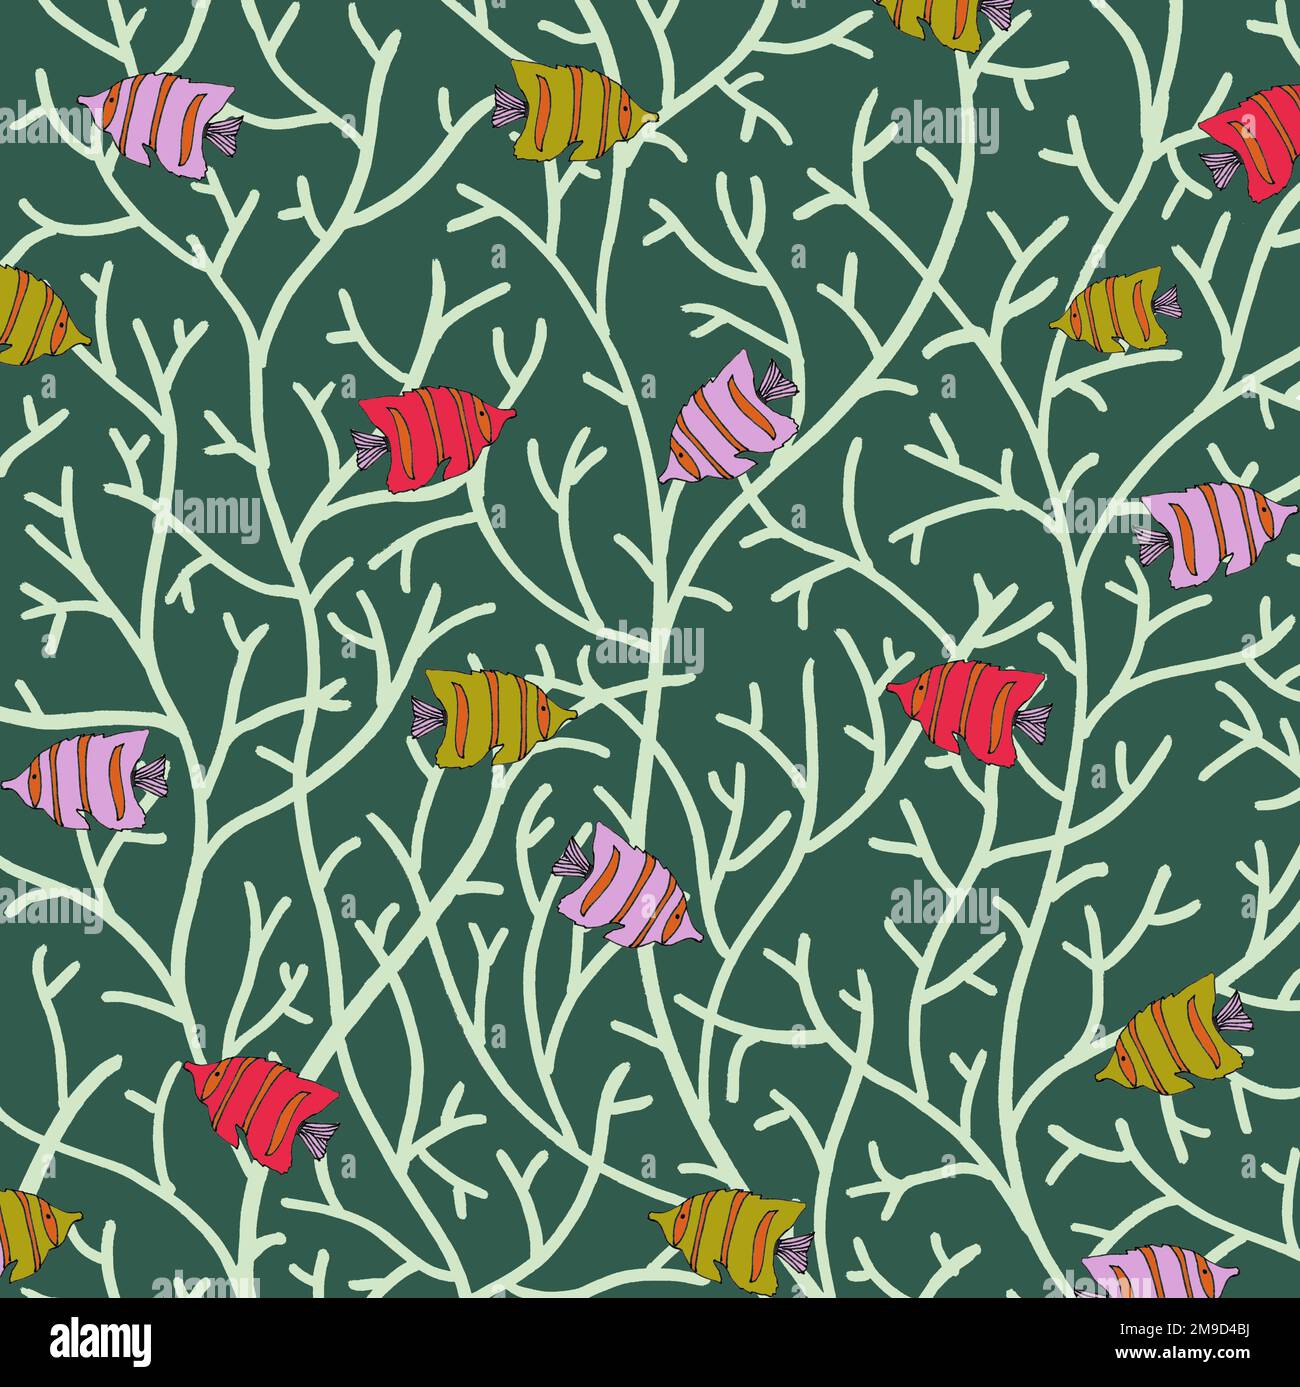 Tropical fish repeating pattern. Stock Photo